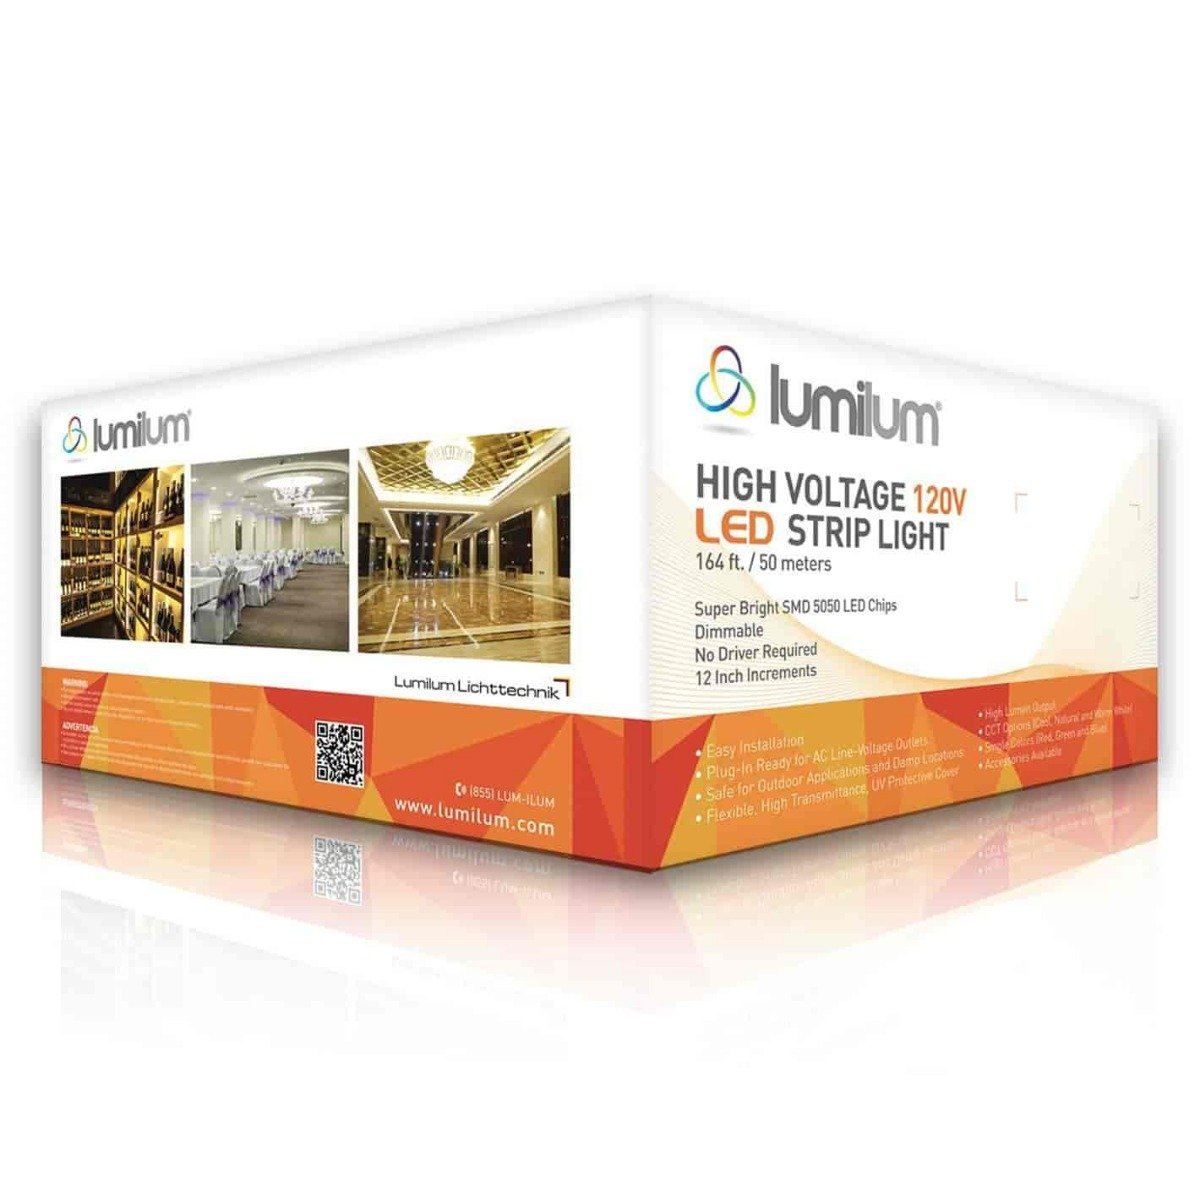 120V led strip lights box with bottom orange half and top white half showing lumilum brand and installation images